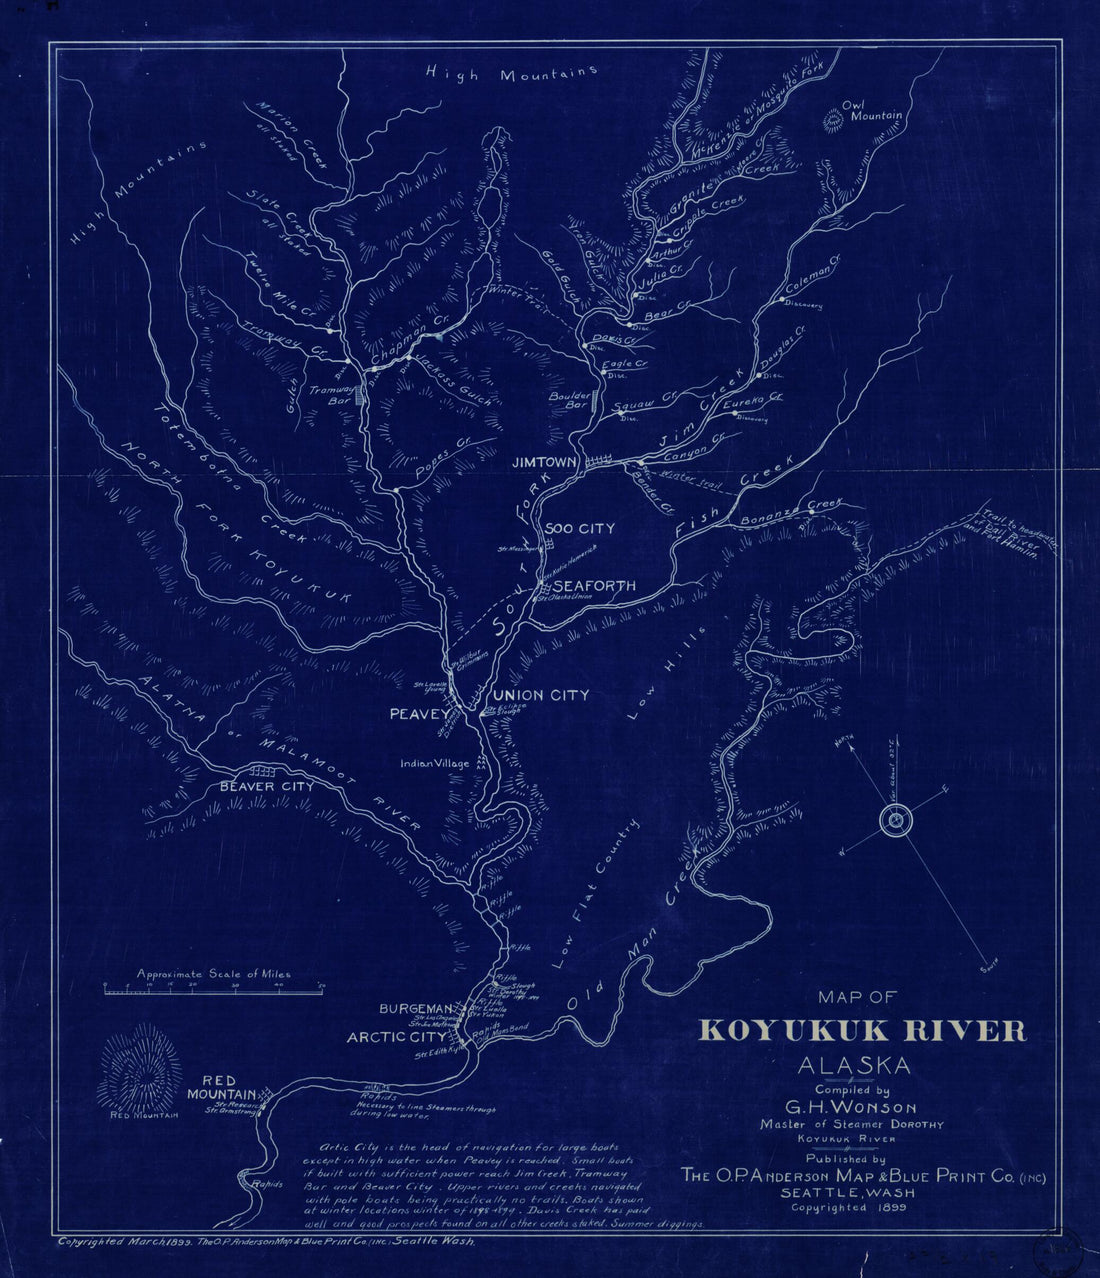 This old map of Map of Koyukuk River, Alaska from 1899 was created by  Anderson Map Company, G. H. Wonson in 1899